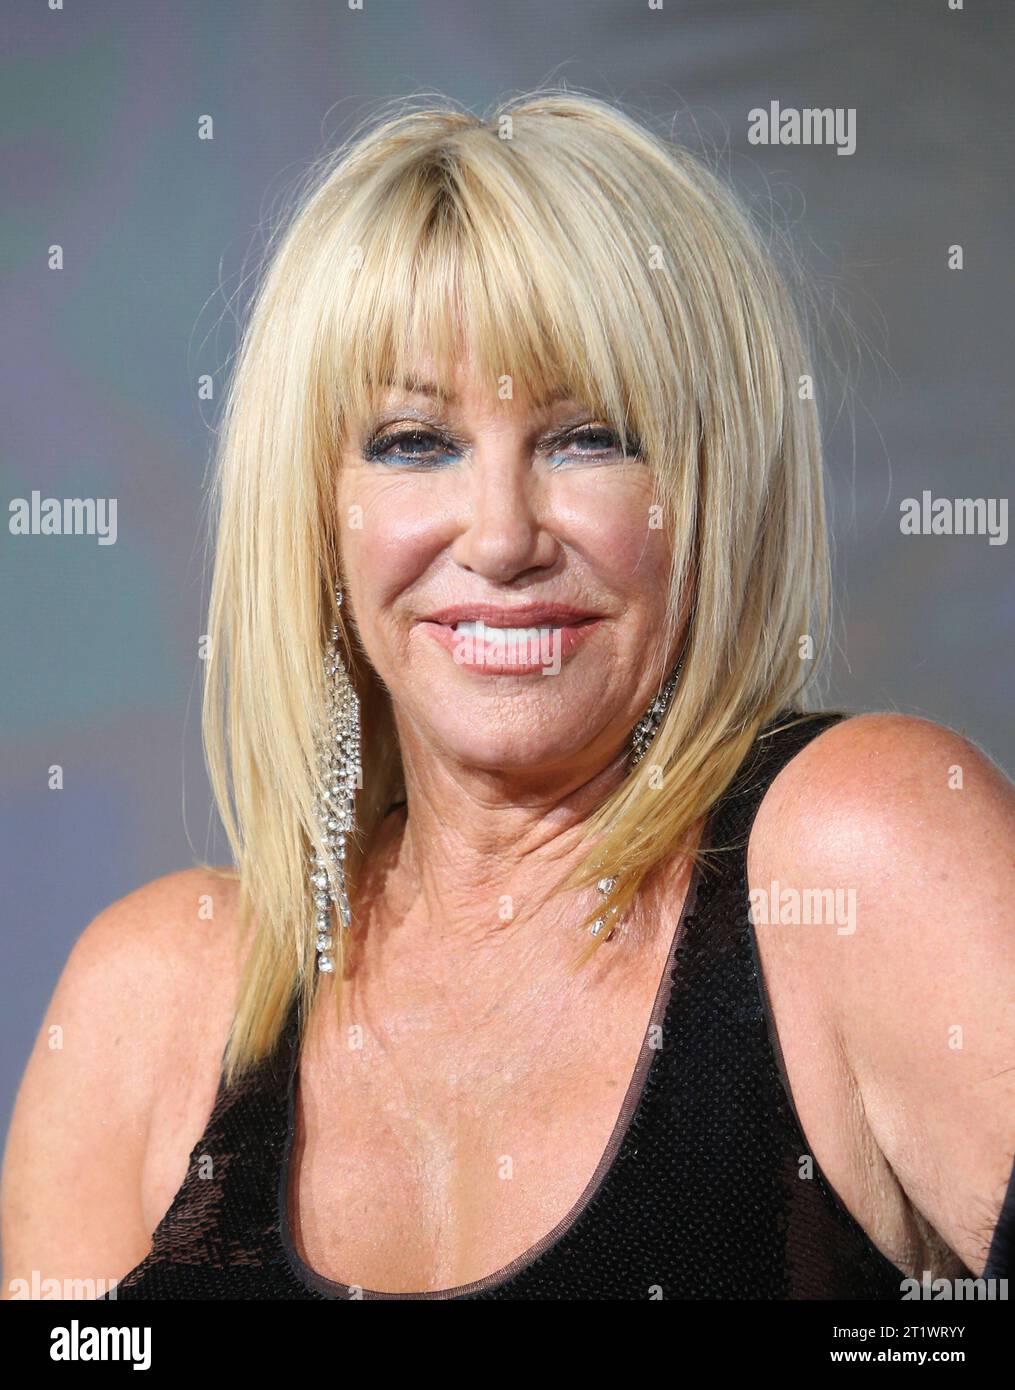 Westwood, CA - DECEMBER 14: Suzanne Somers, At Premiere Of Columbia Pictures Passengers, At Regency Village Theatre In California on December 14, 2016. Copyright: xFayexSadoux Credit: Imago/Alamy Live News Stock Photo